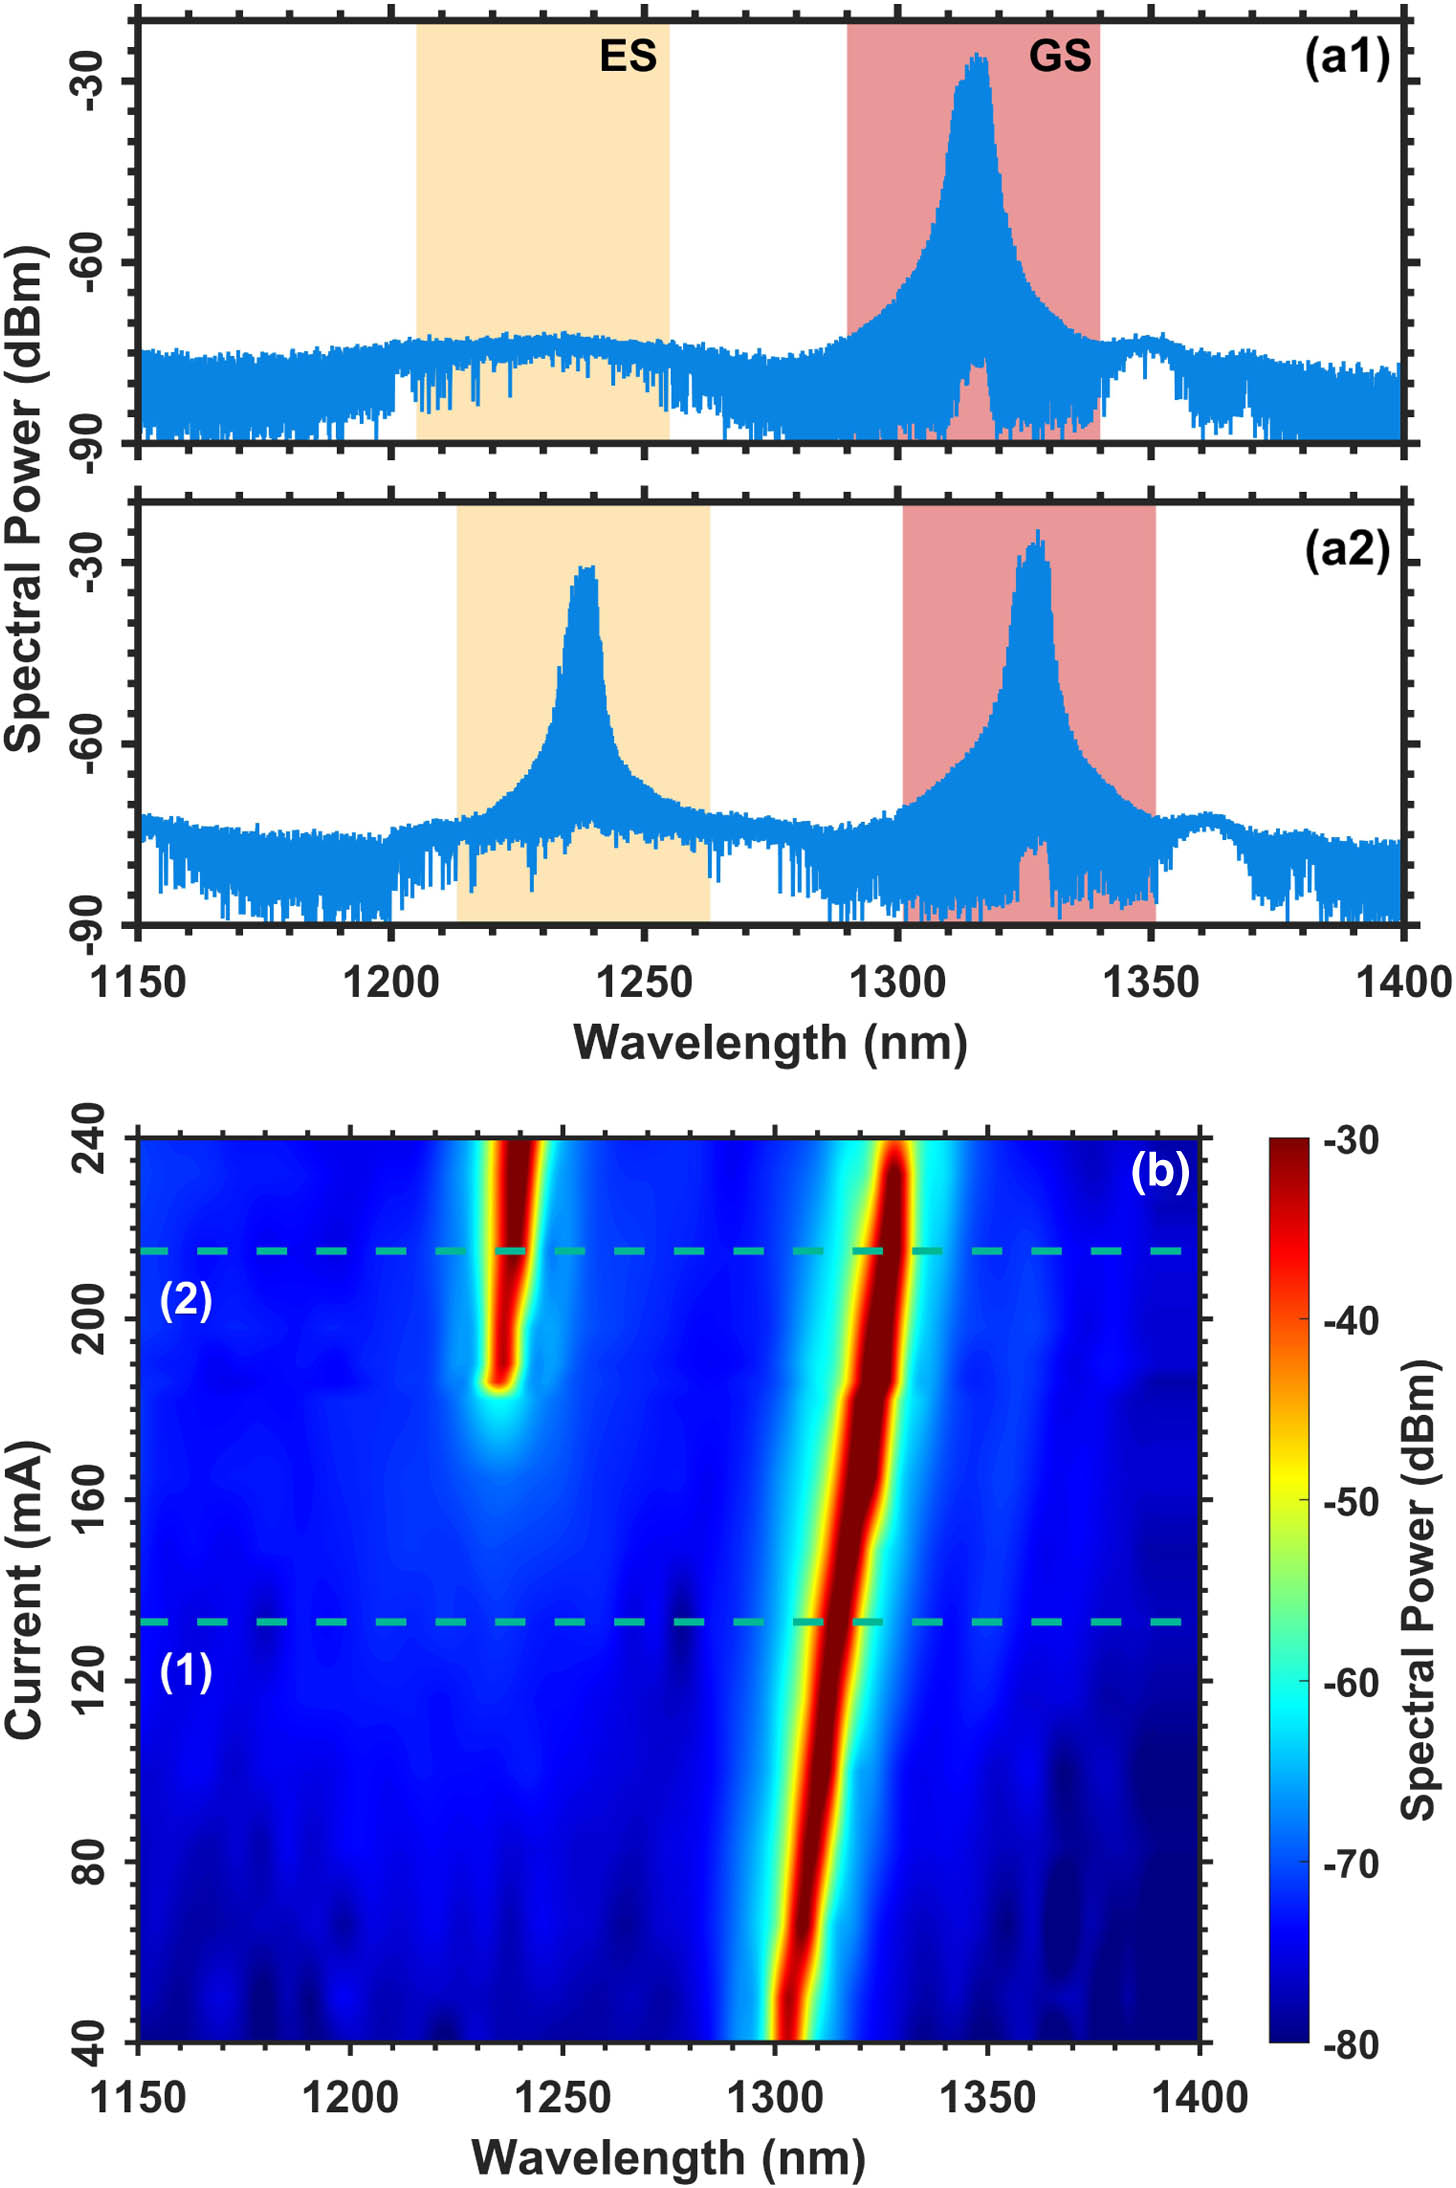 Optical spectrum of (a1) sole GS lasing and (a2) dual-state lasing of QD lasers. (b) Optical spectrum mapping with the increase of bias current for the dual-state QD laser. Dashed lines (1) and (2) in (b) mark the bias currents of (a1) and (a2), respectively.